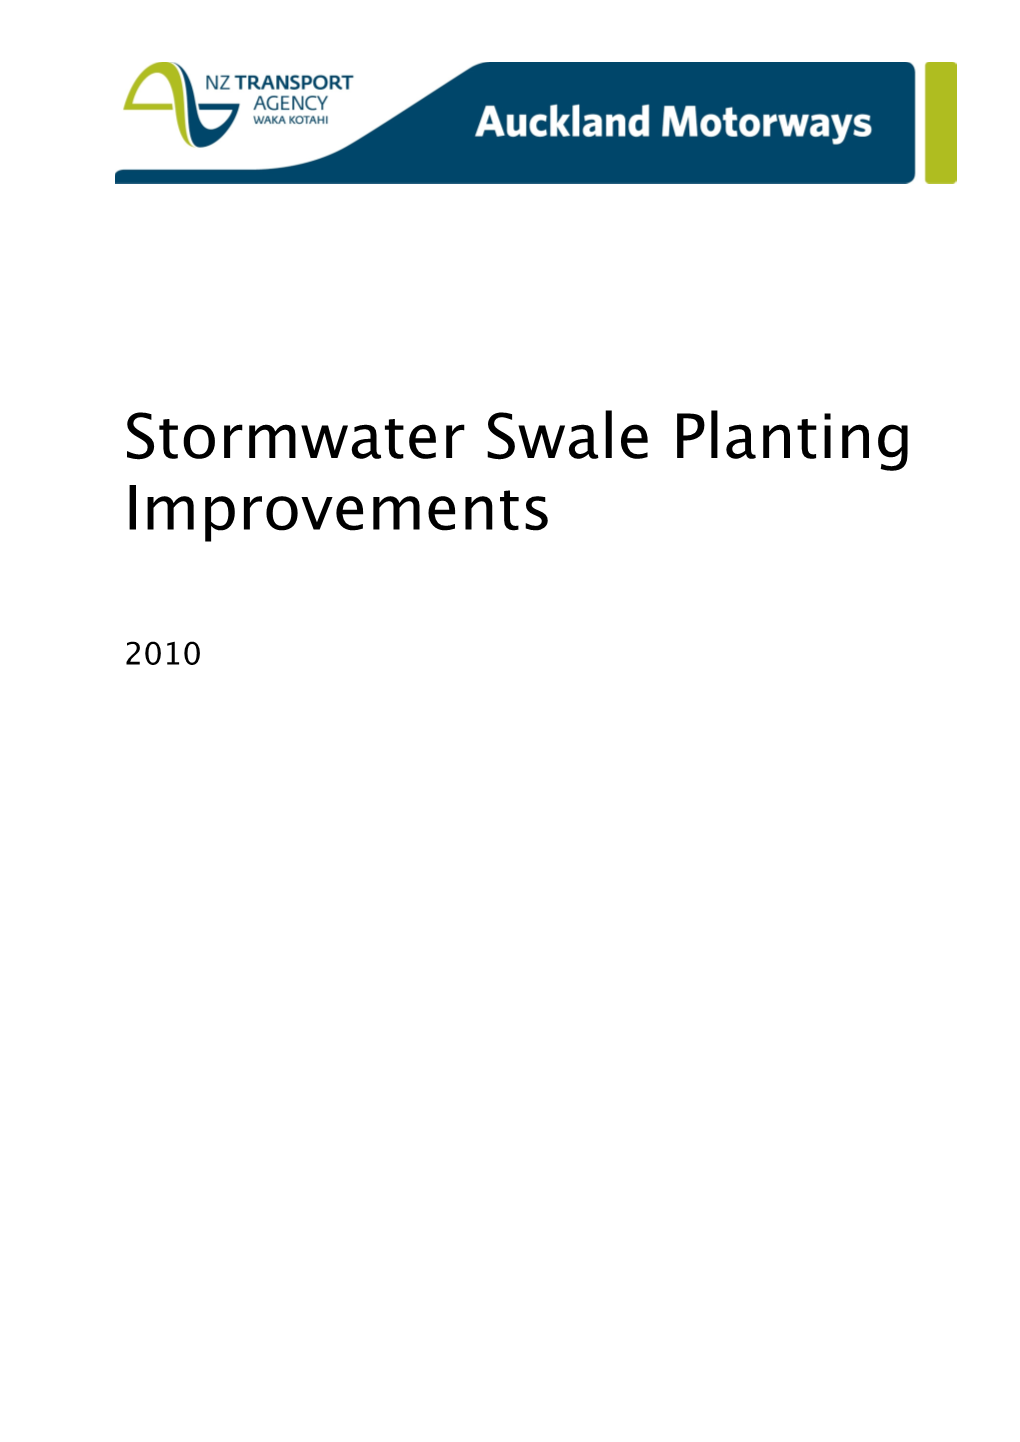 Stormwater Swale Planting Improvements